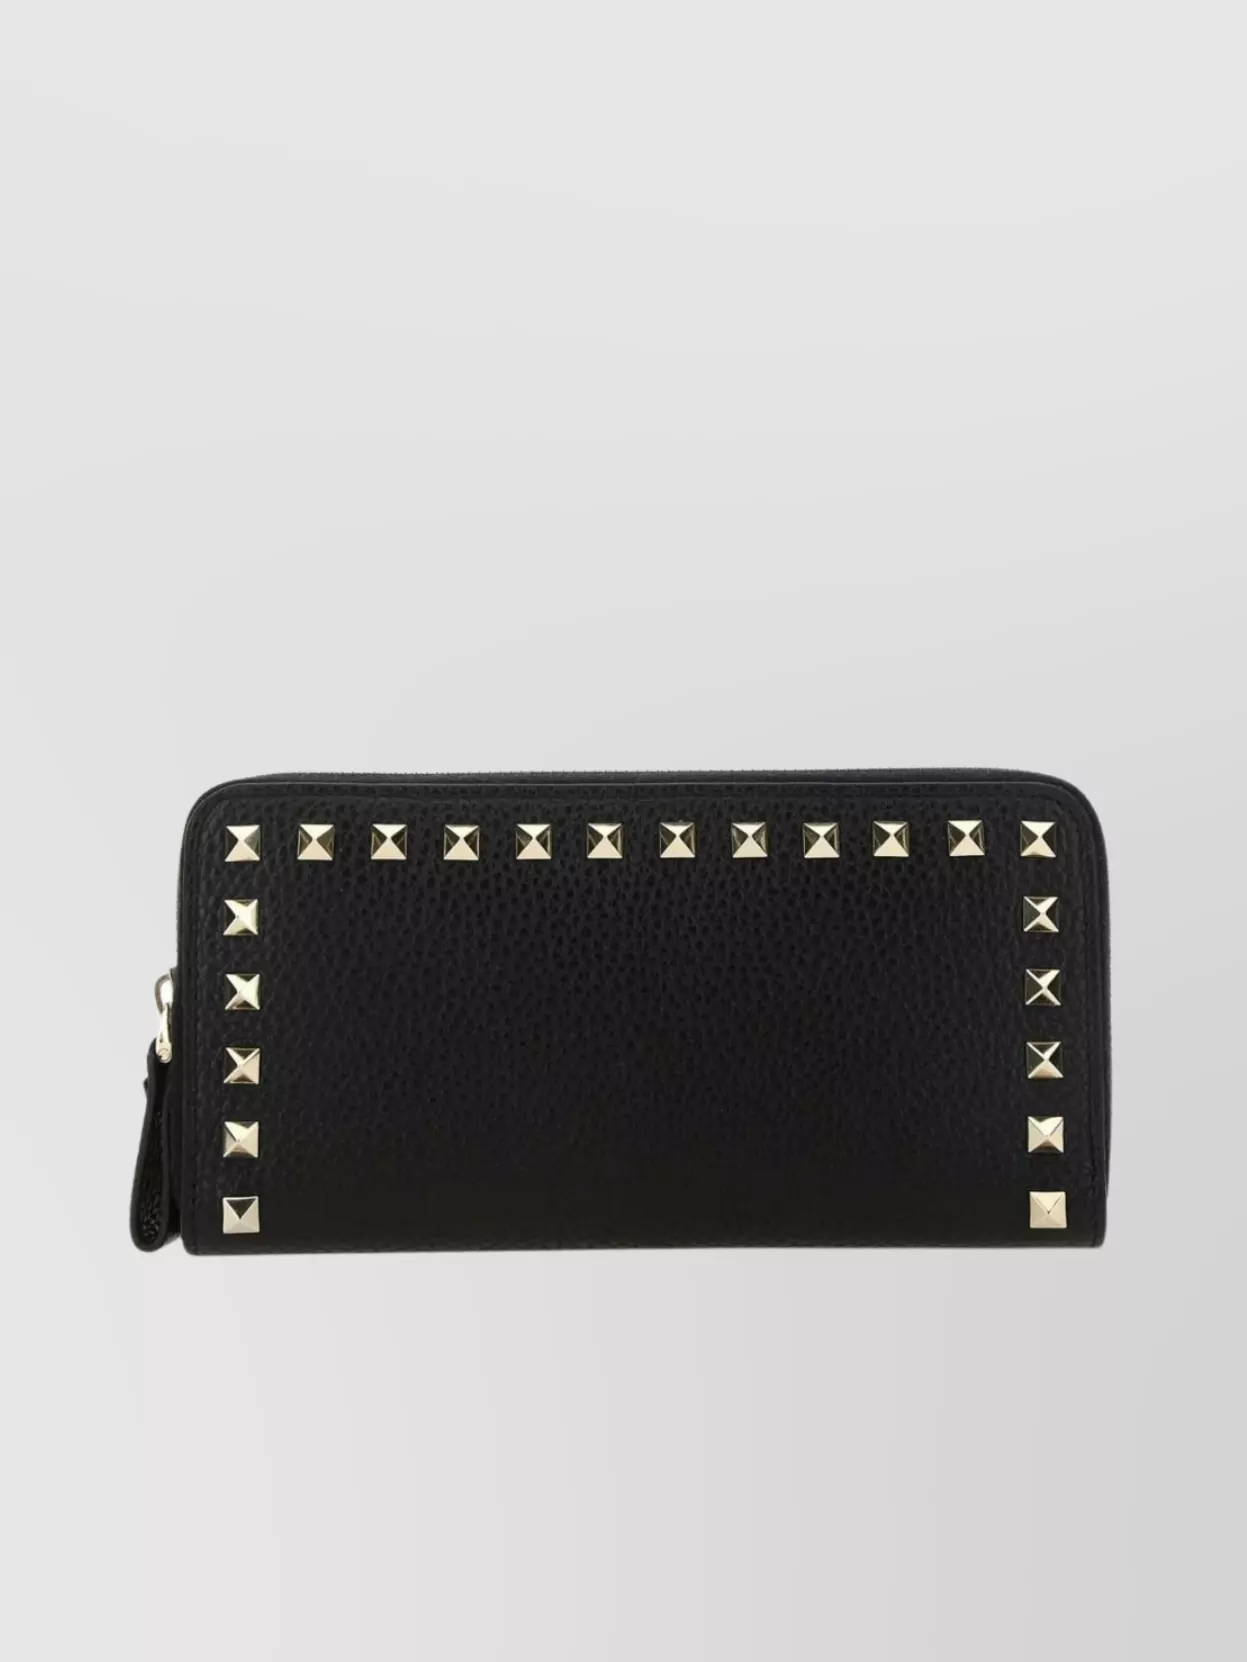 Valentino Garavani Leather Wallet With Textured Finish And Studded Detail In Black